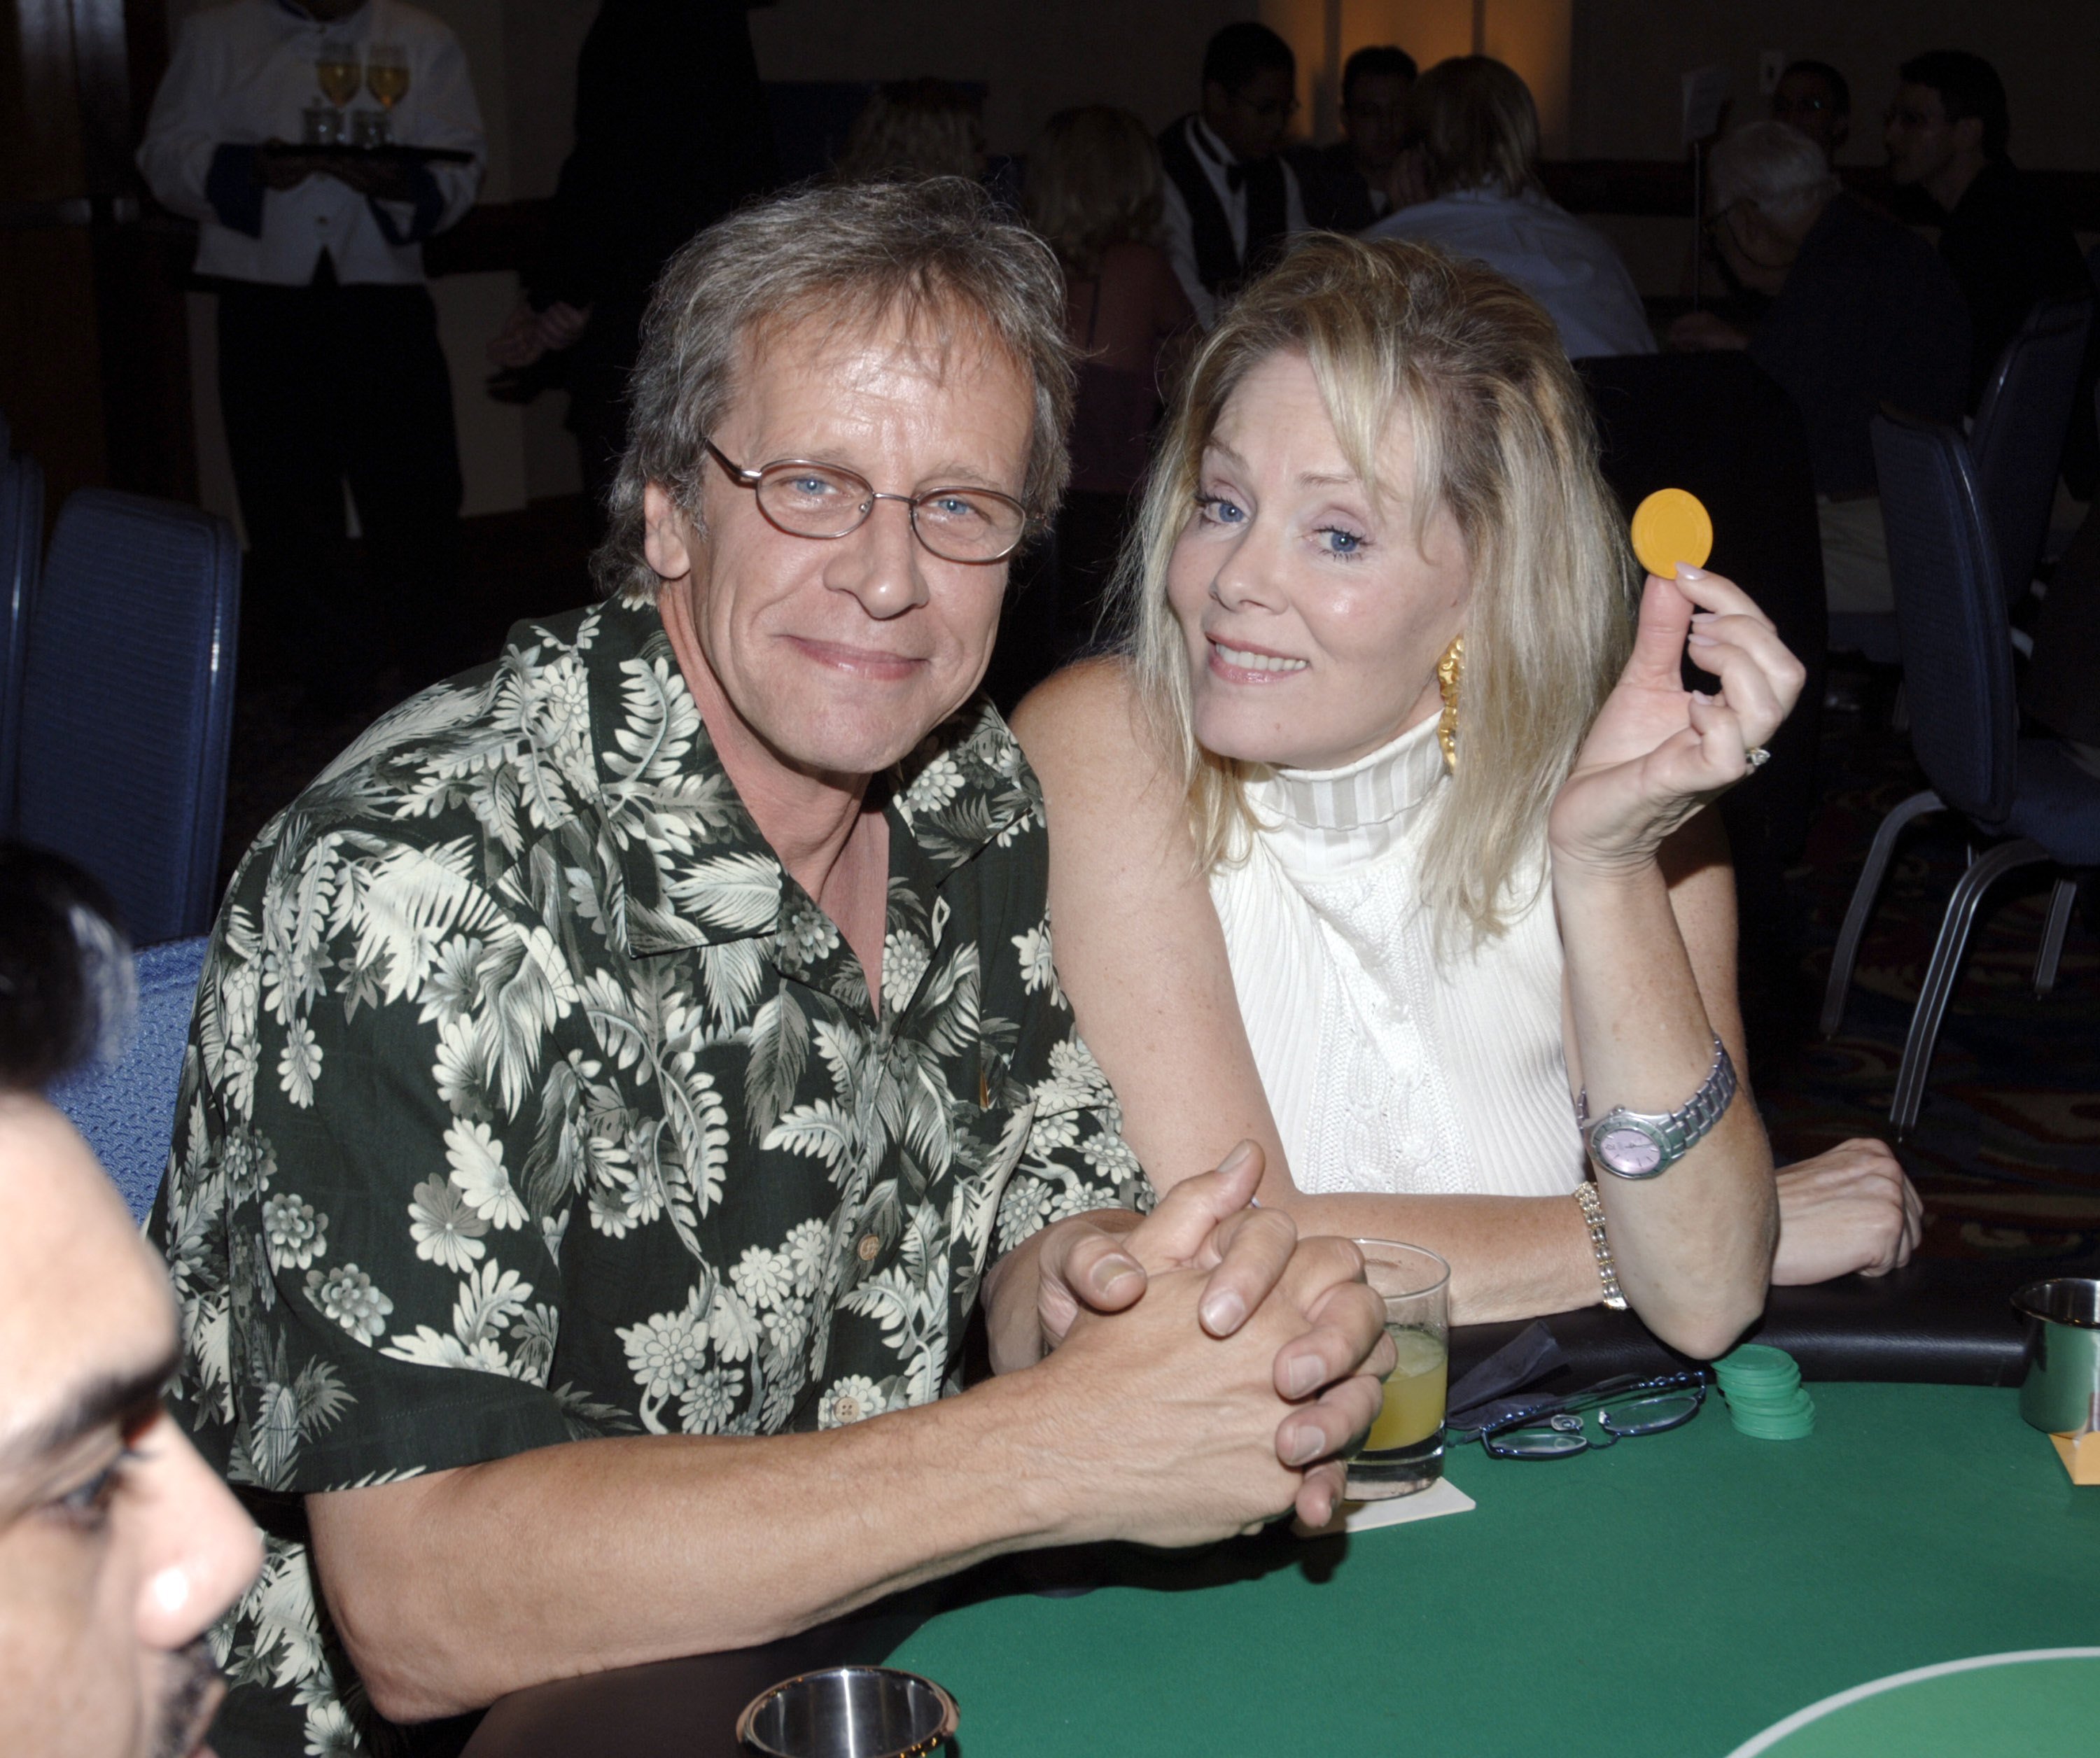 Richard Gilliland and Jean Smart attend the Texas Hold'Em Casino Night Fundraiser in 2006